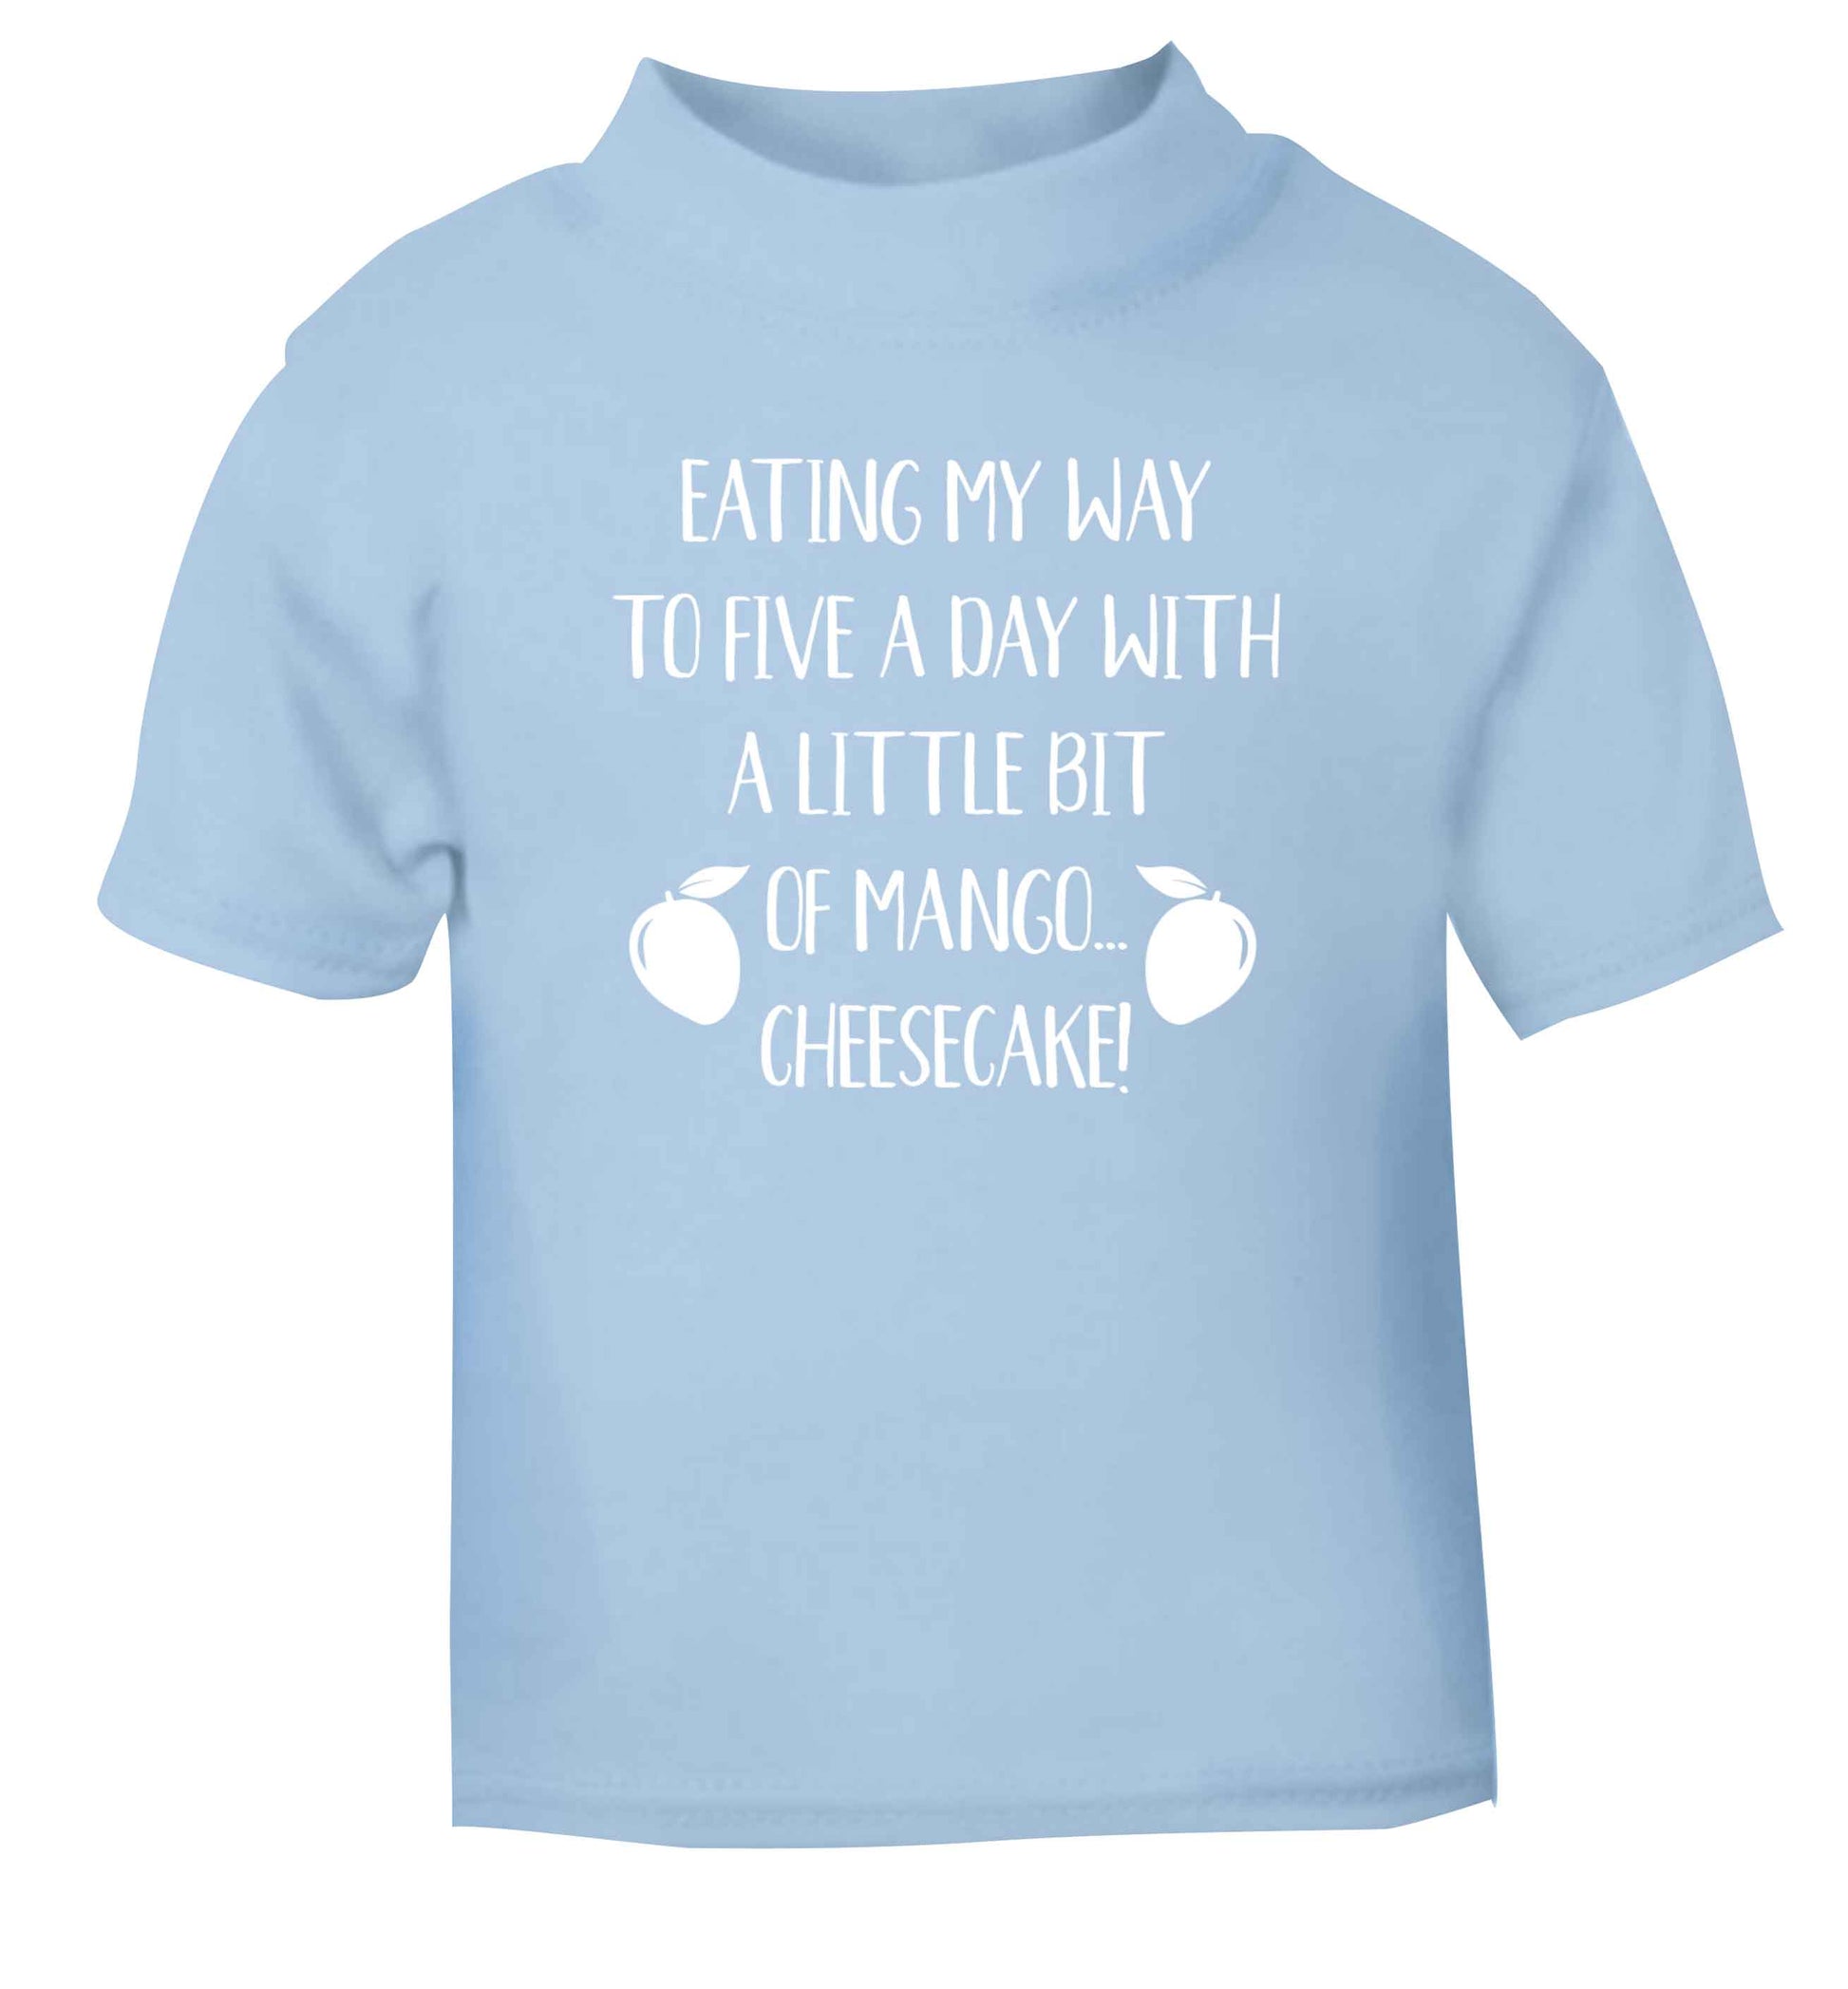 Eating my way to five a day with a little bit of mango cheesecake light blue Baby Toddler Tshirt 2 Years